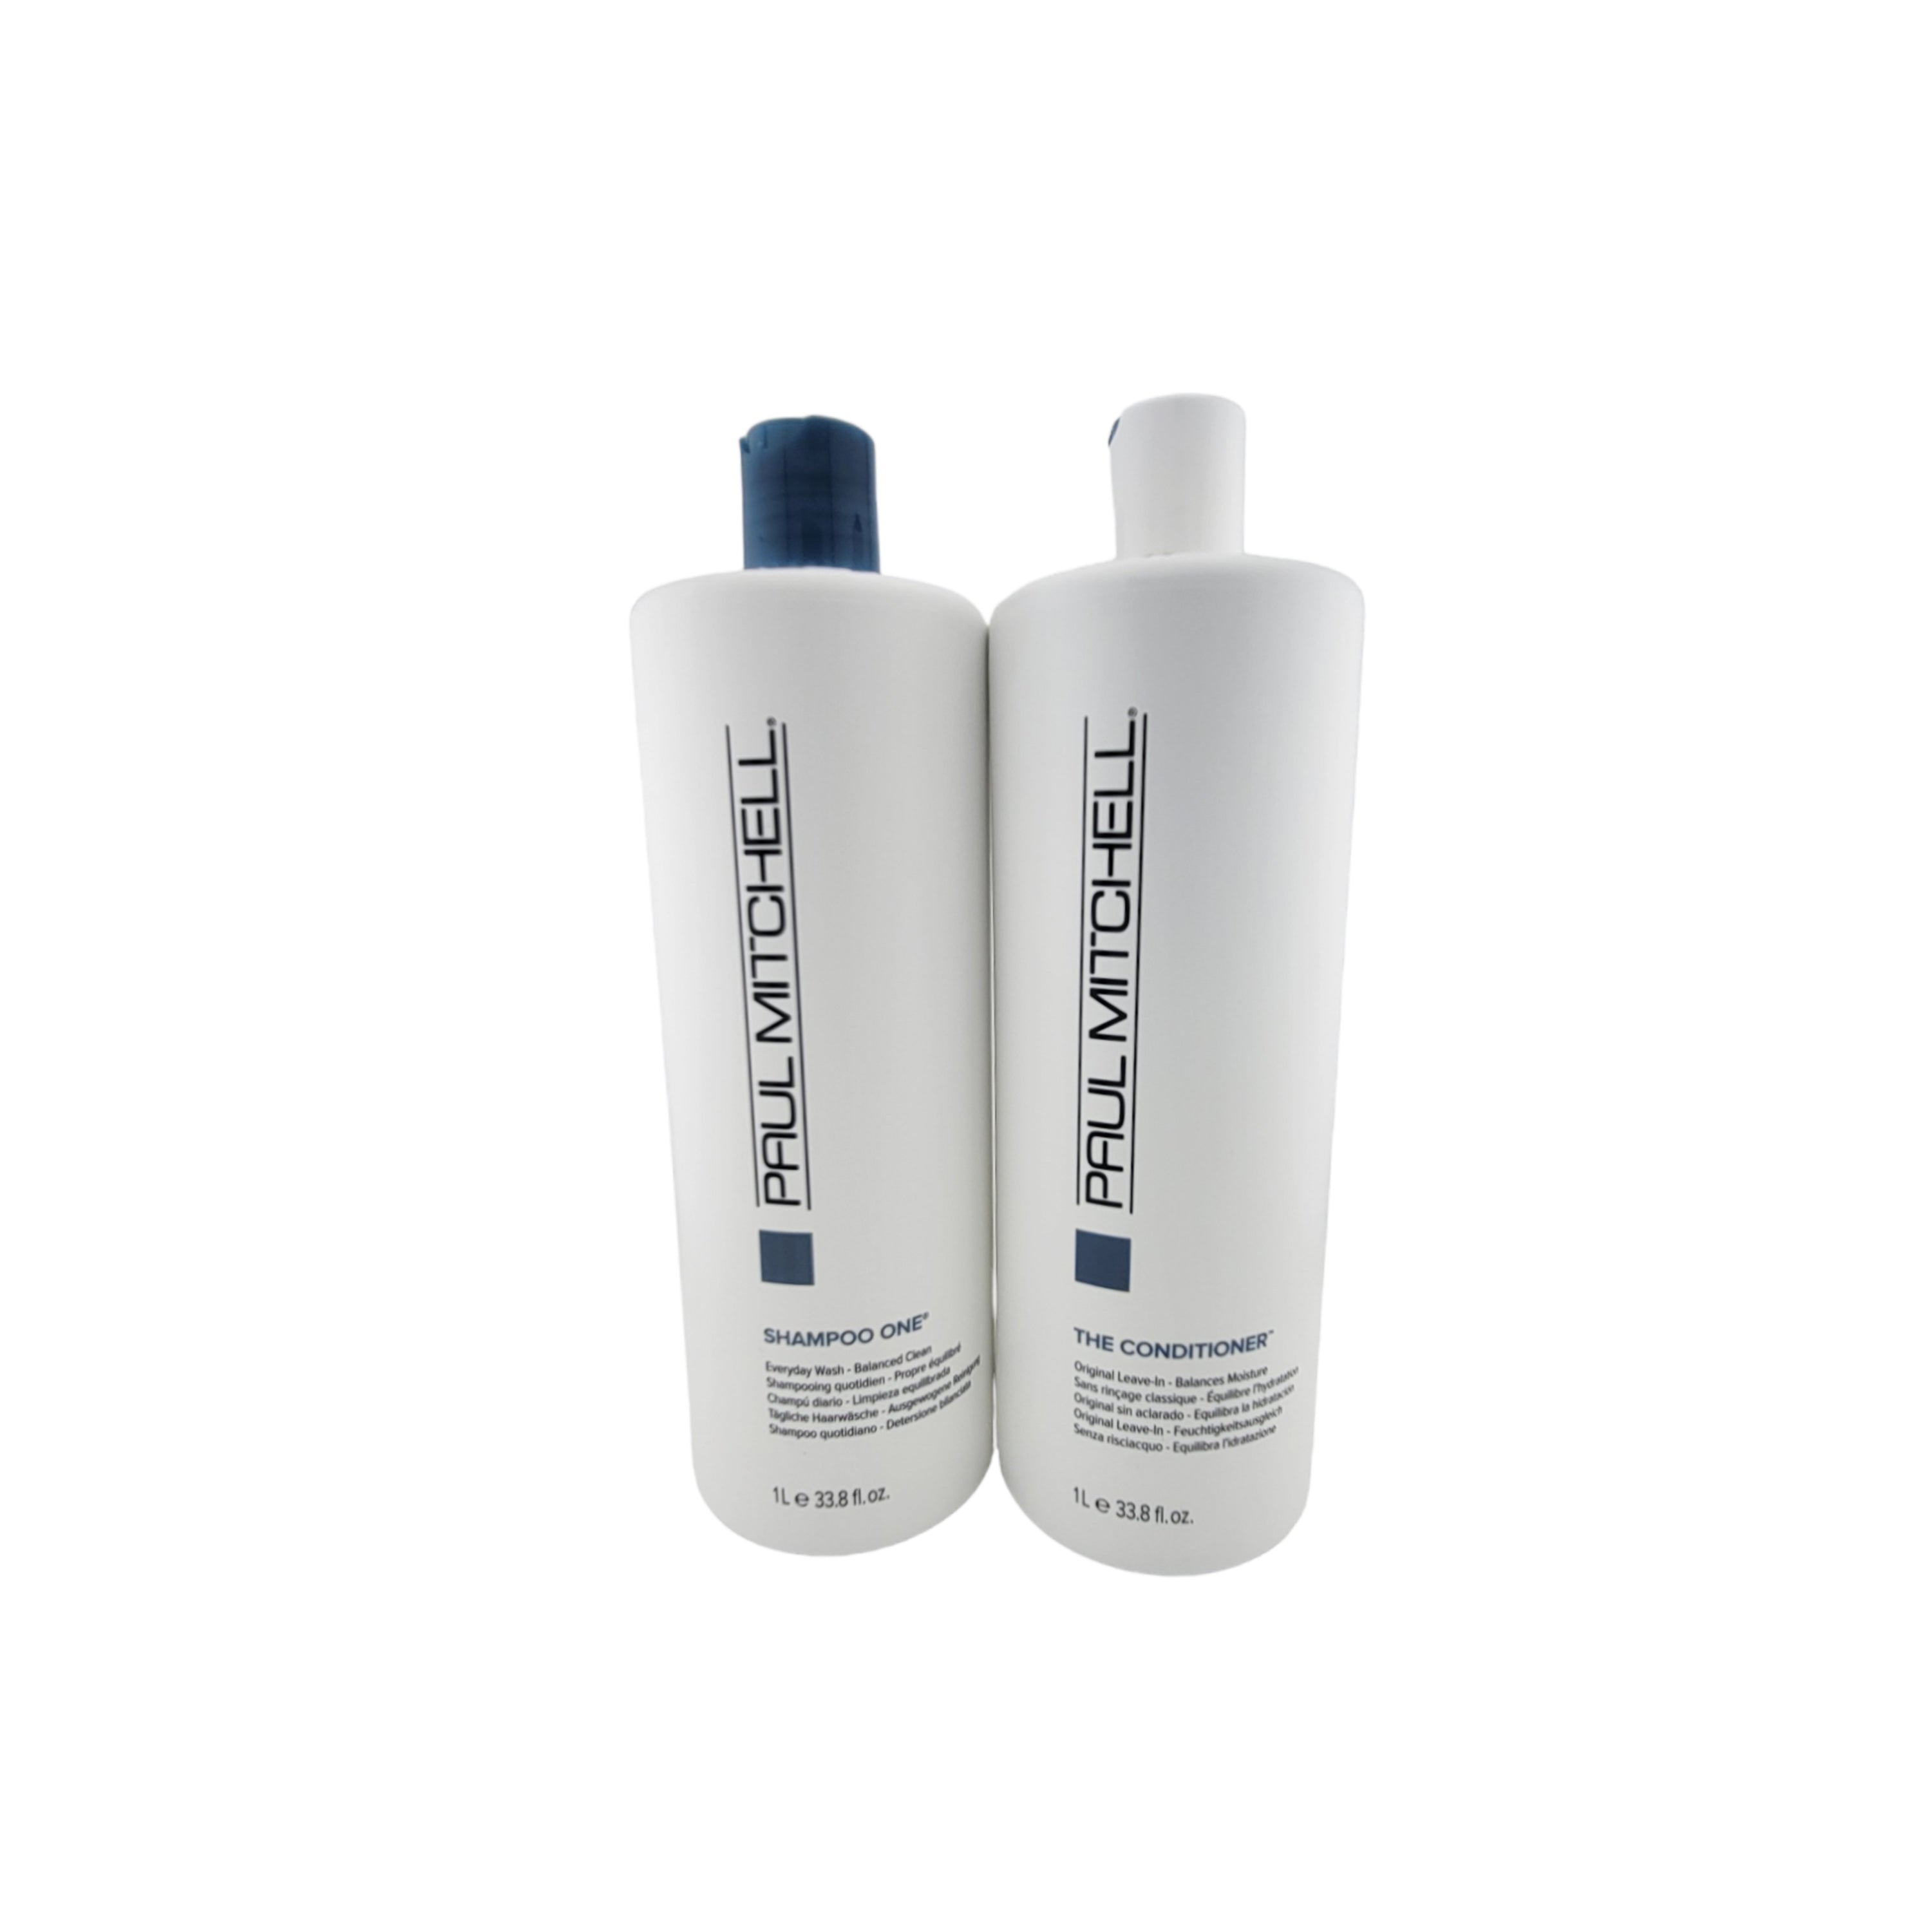 Paul Mitchell Duo (Shampoo One & The Conditioner)